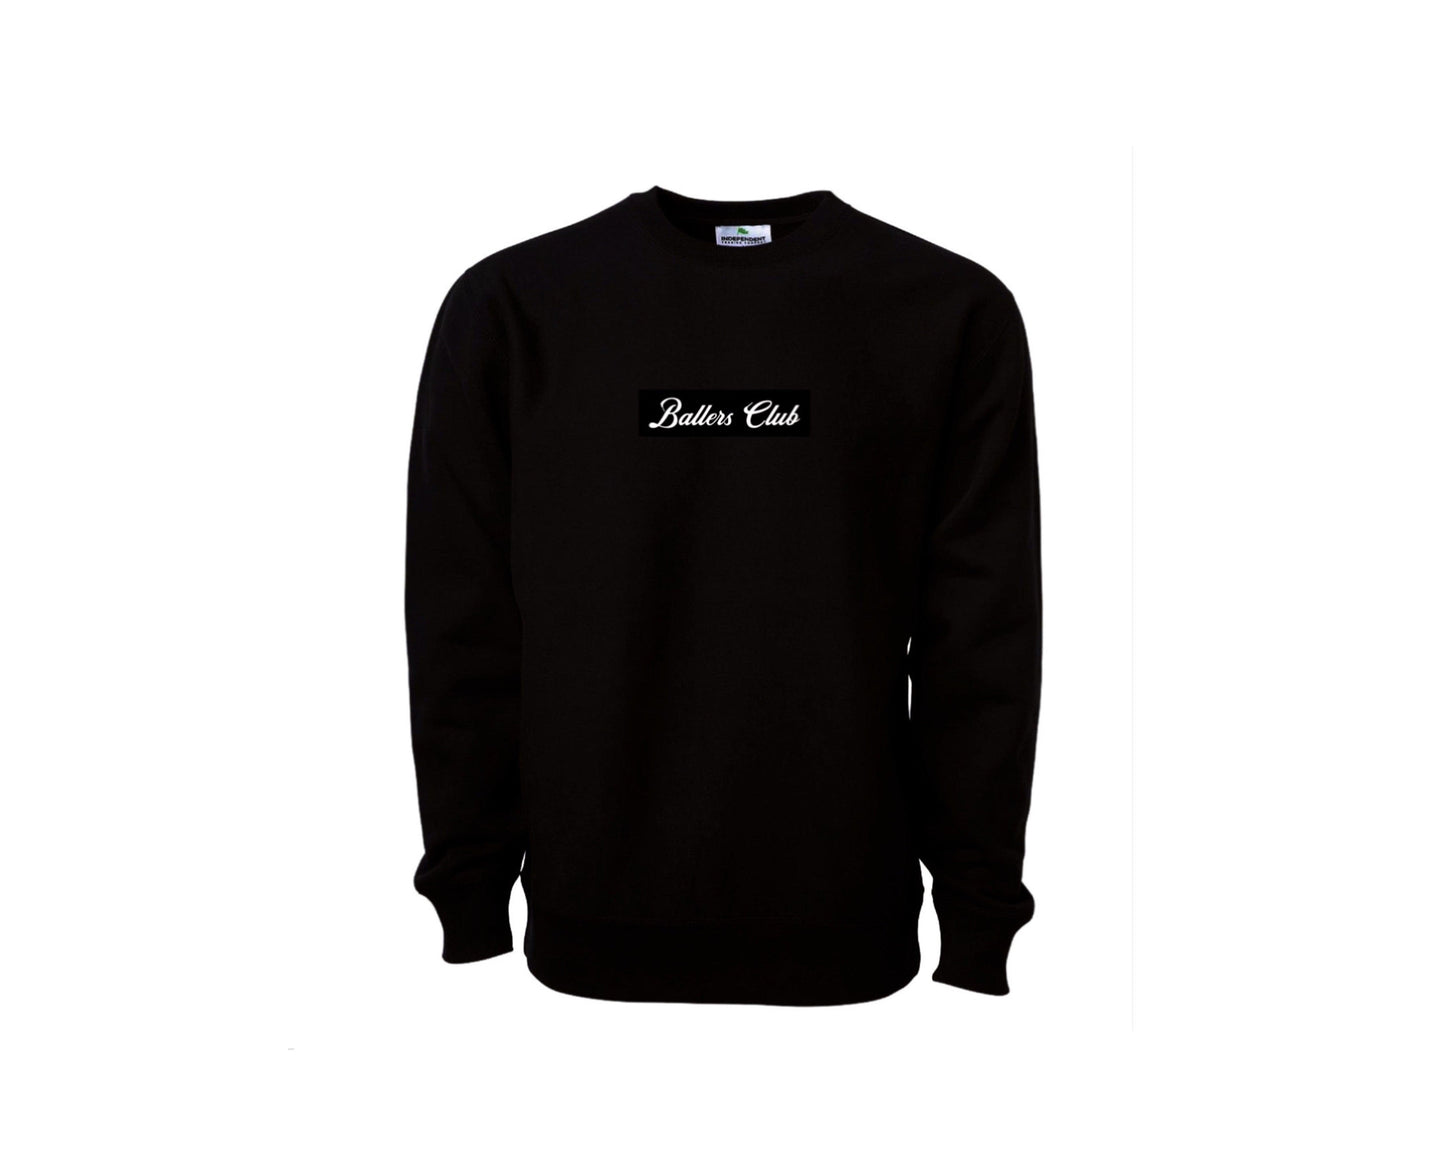 Exclusive Ballers Club Box Logo Crewneck Sweatshirt - Image 02 - Only at www.BallersClubKickz.com - This is an Exclusive Ballers Club Men's Premium Heavyweight Cross-Grain Box Logo Crewneck Sweatshirt. This crewneck sweatshirt features 13.5oz/450gm of 3-End brushed back fleece fabric with a 20 singles 100% Ring Spun Cotton.